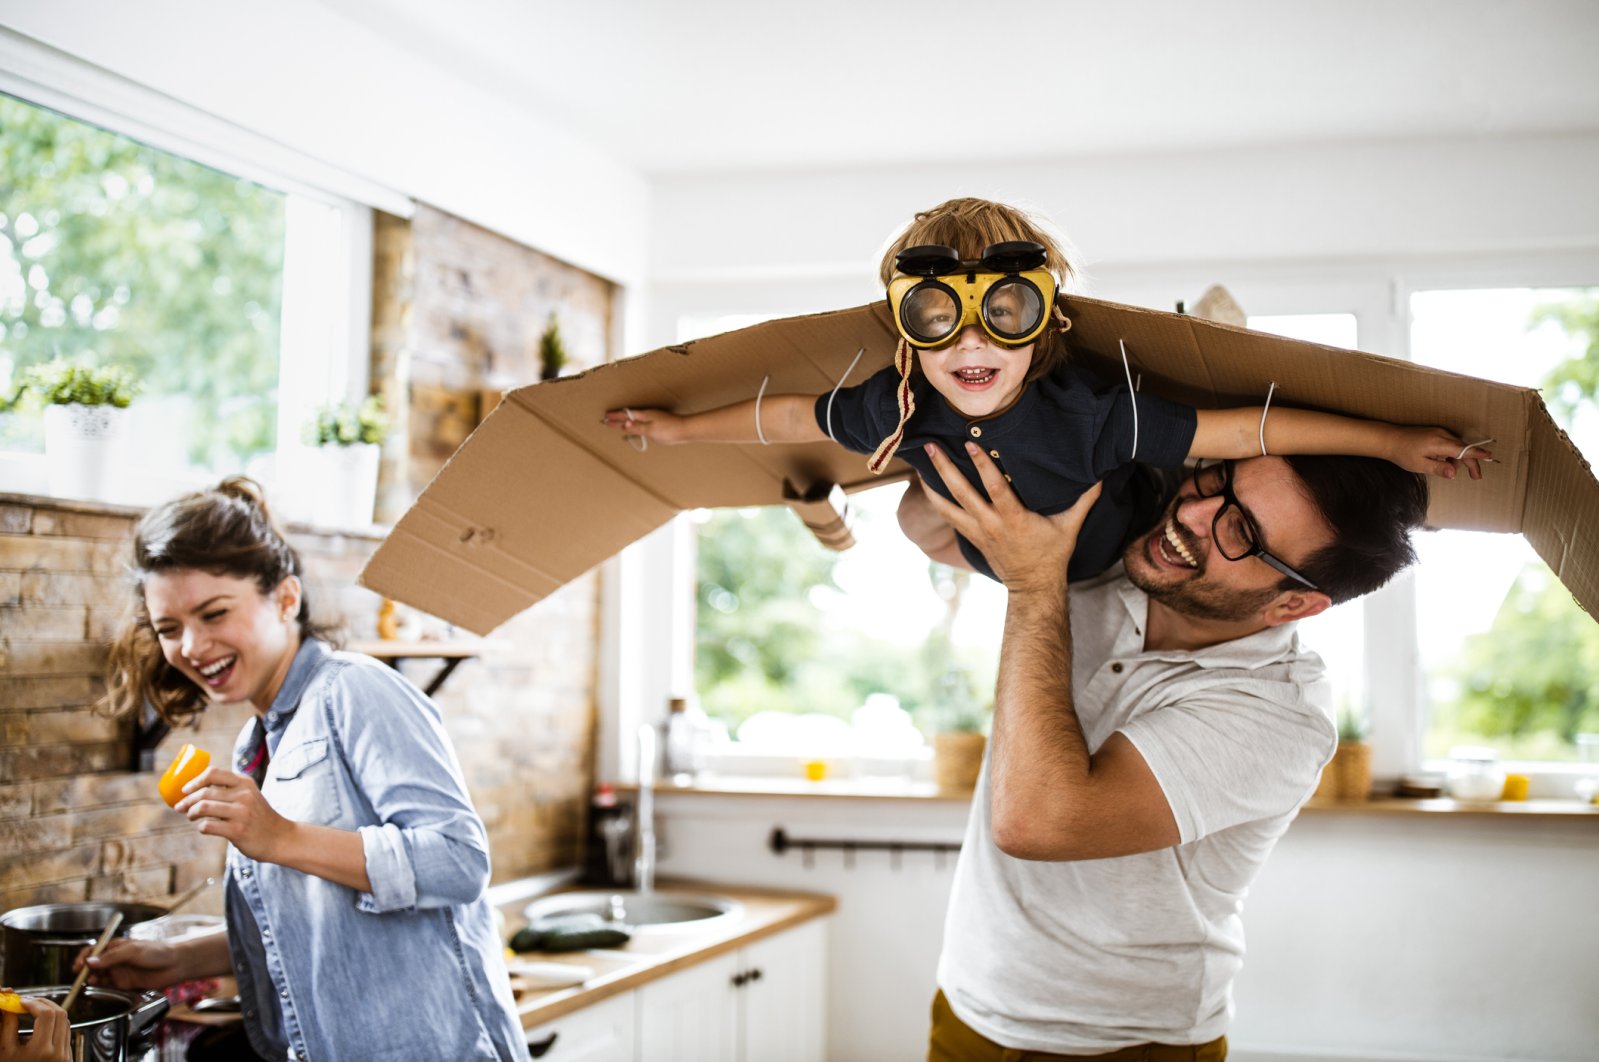 Dads who play with their kids significantly boost their child's mental development. (iStock Photo)